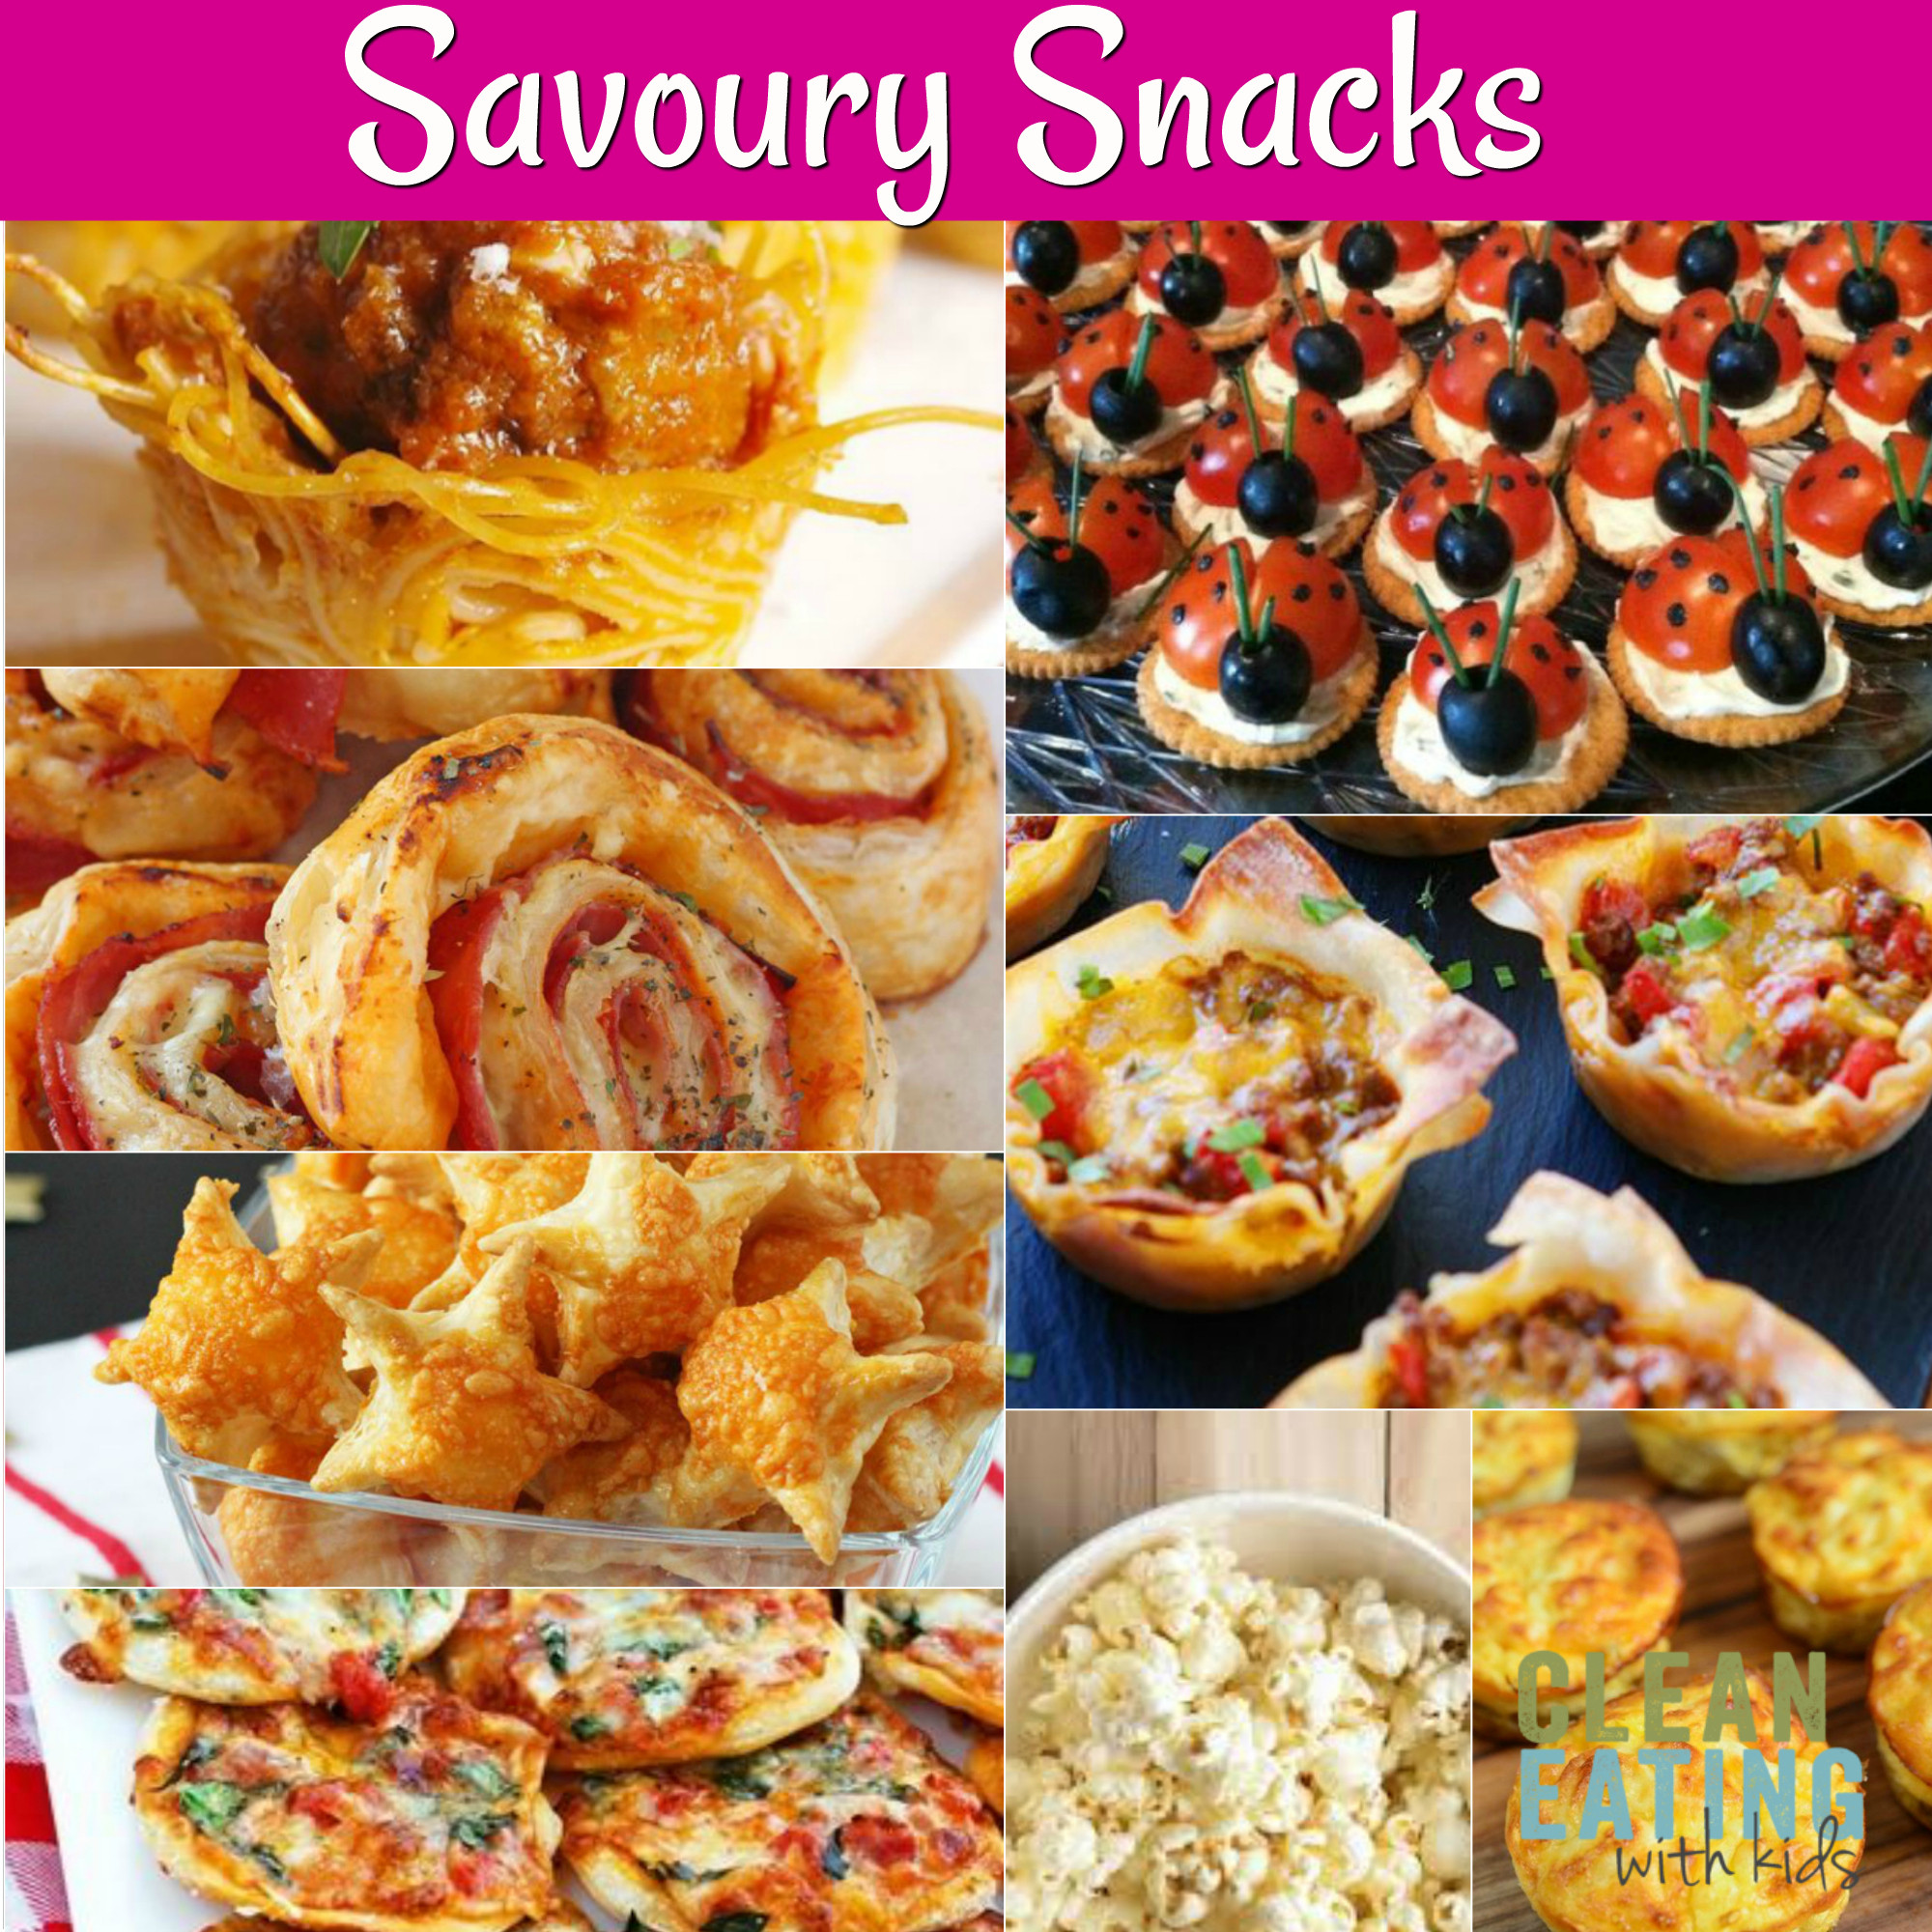 Appetizer Ideas For Birthday Party
 25 Healthy Birthday Party Food Ideas Clean Eating with kids